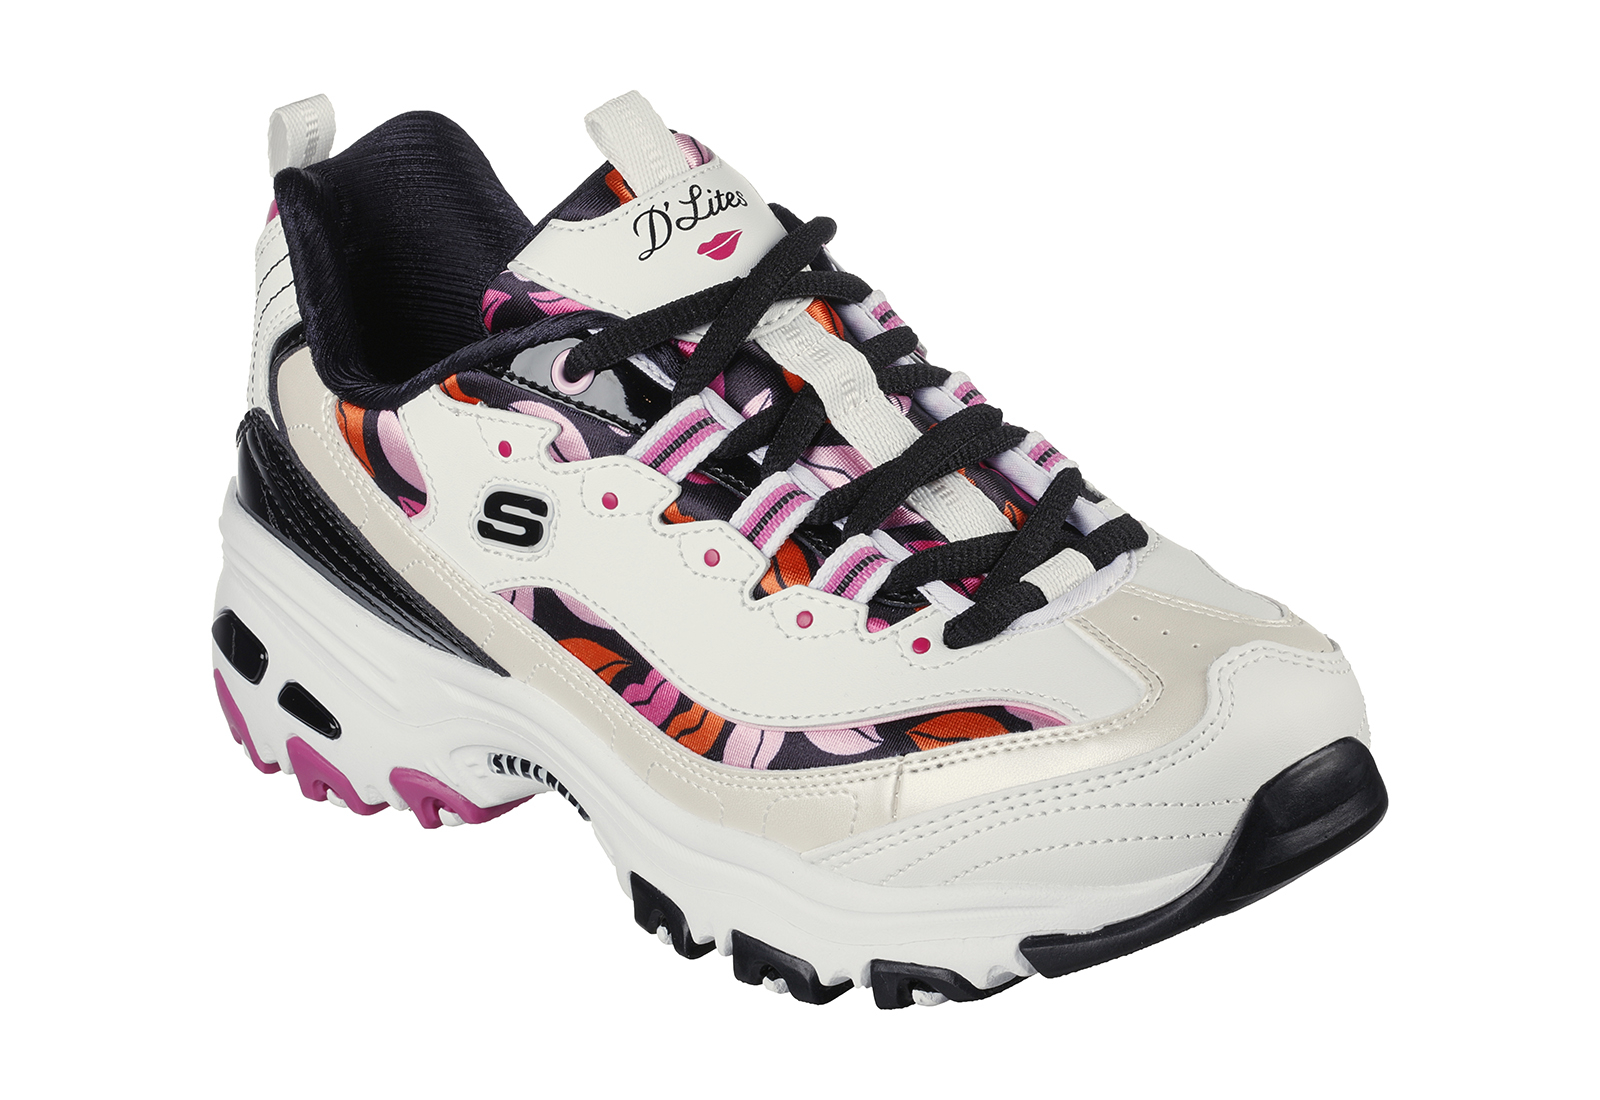 Skechers Sneakers - D Lites-Red Slip - 149679-WBPK - Online shop for  sneakers, shoes and boots